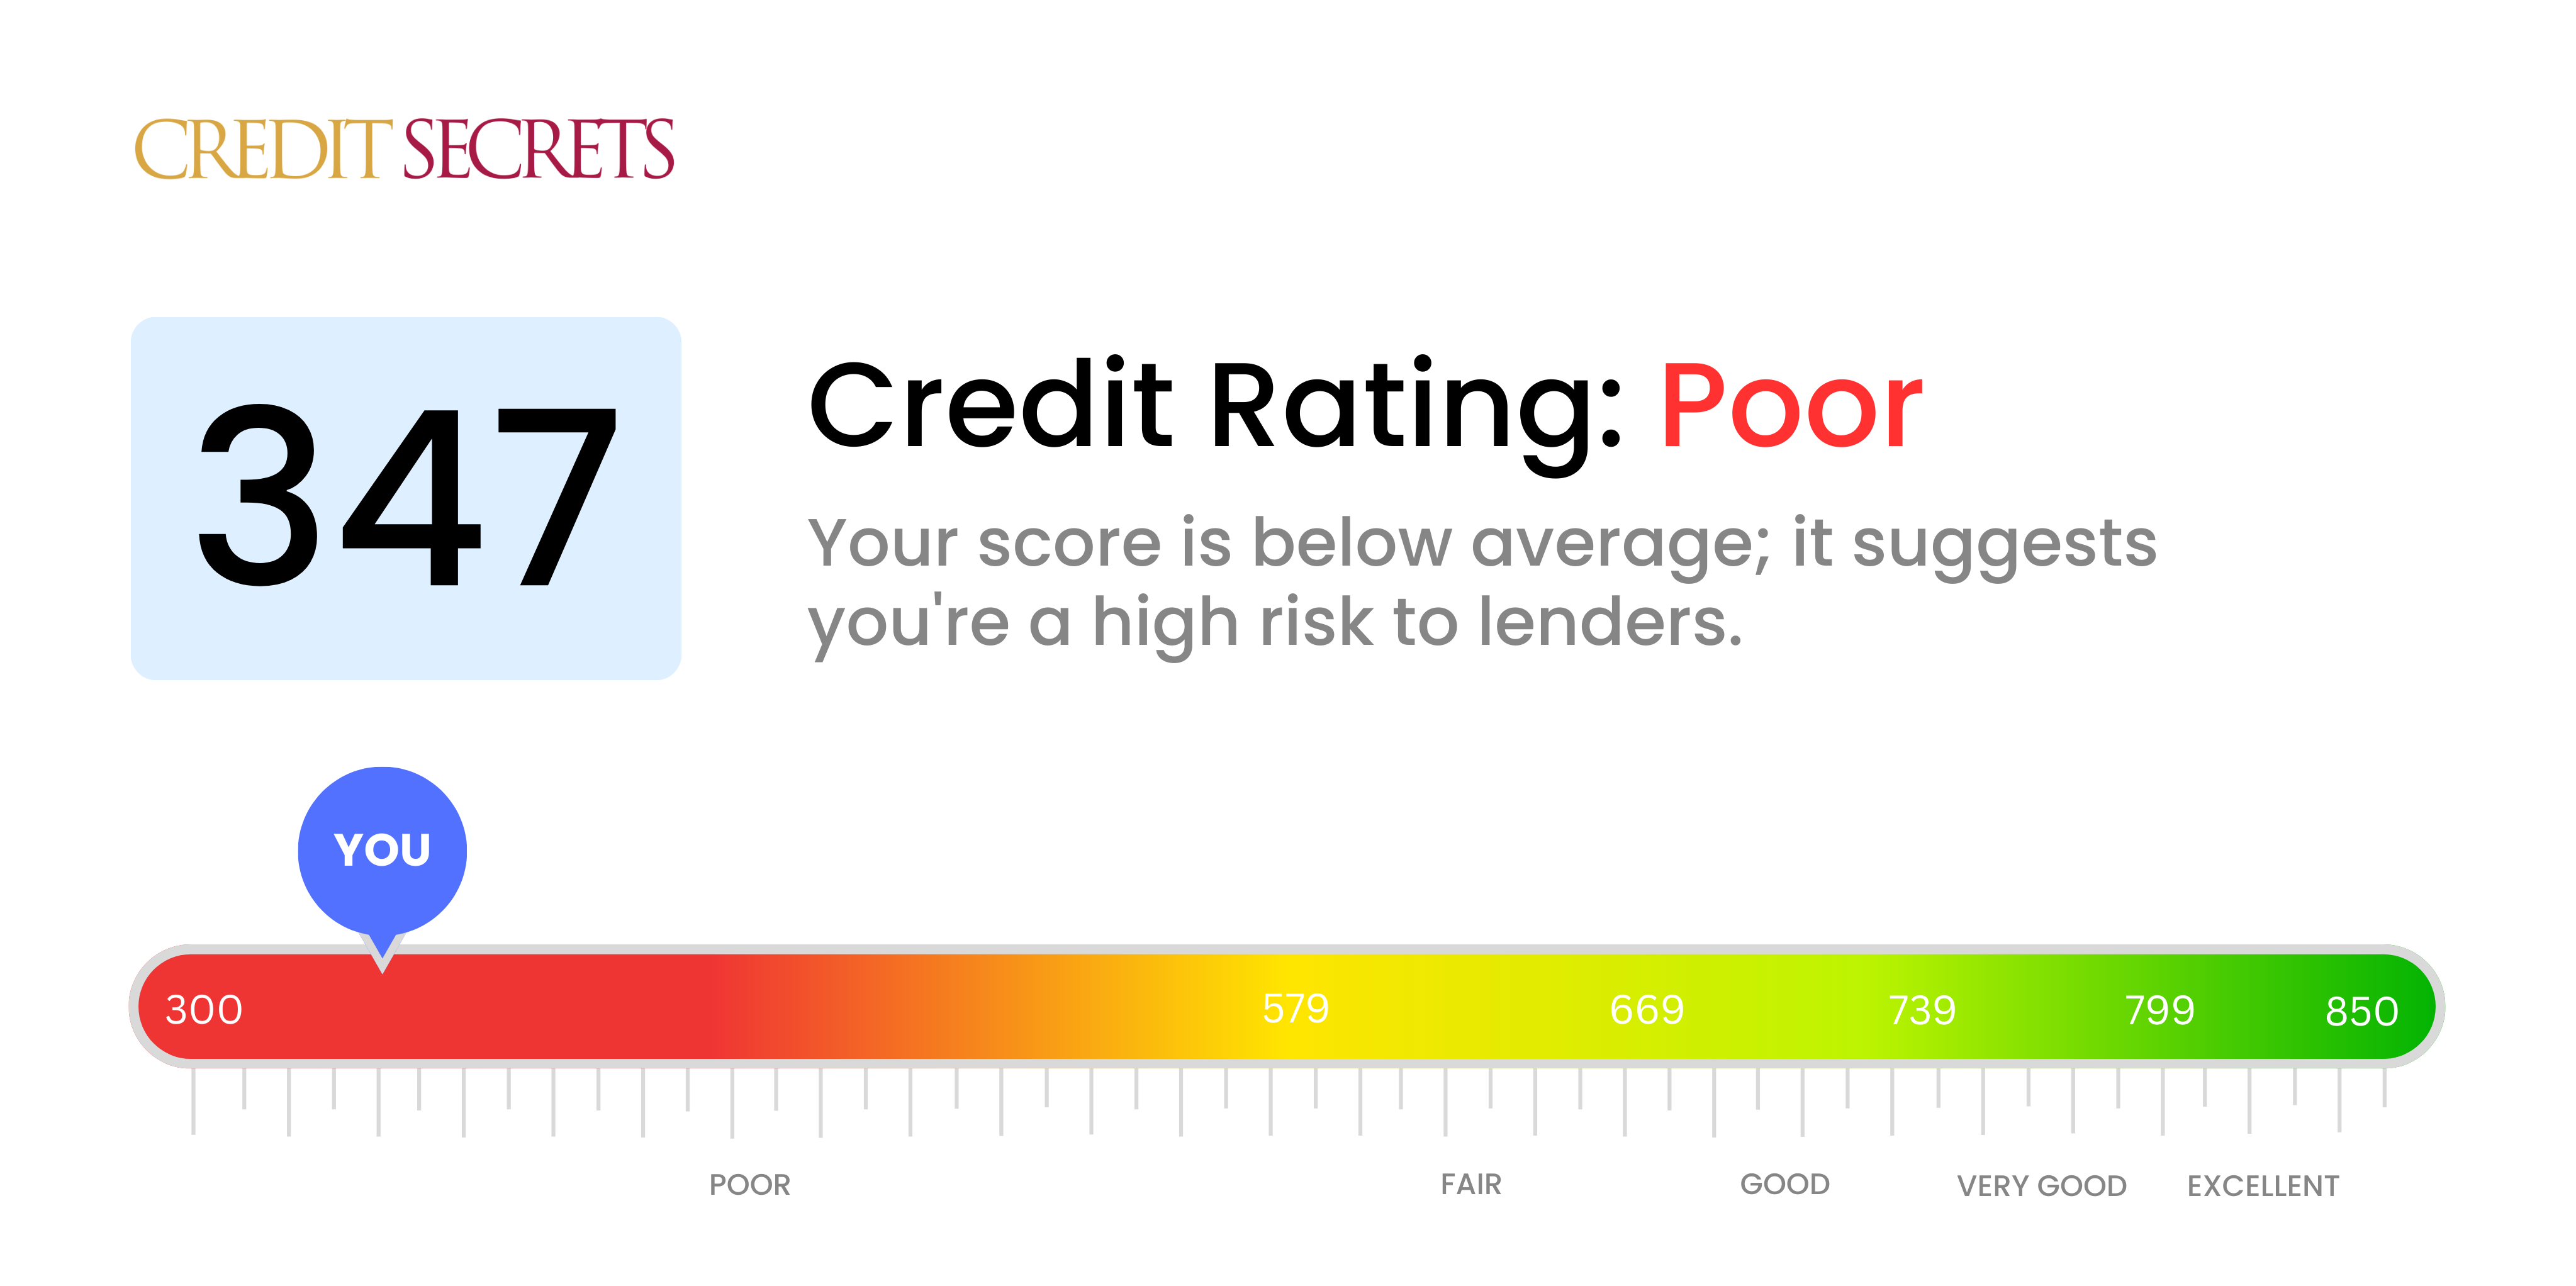 Is 347 a good credit score?